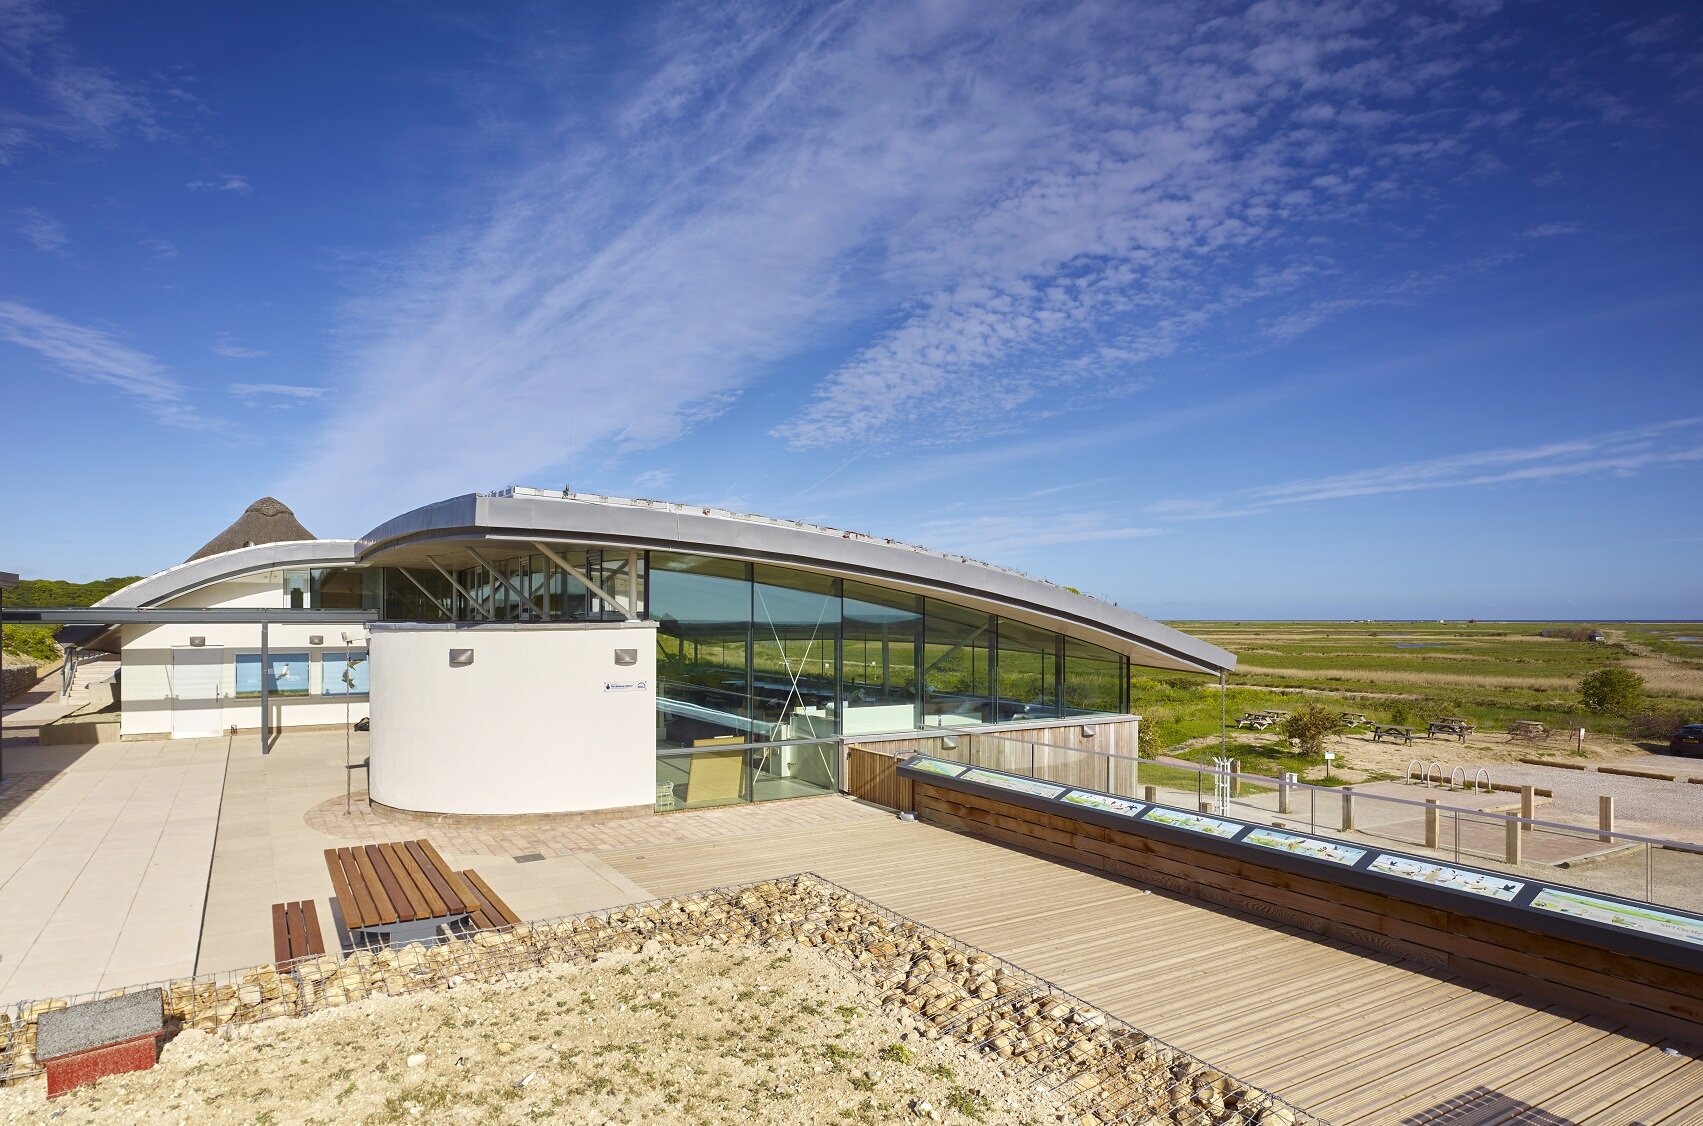 Cley Visitor Centre